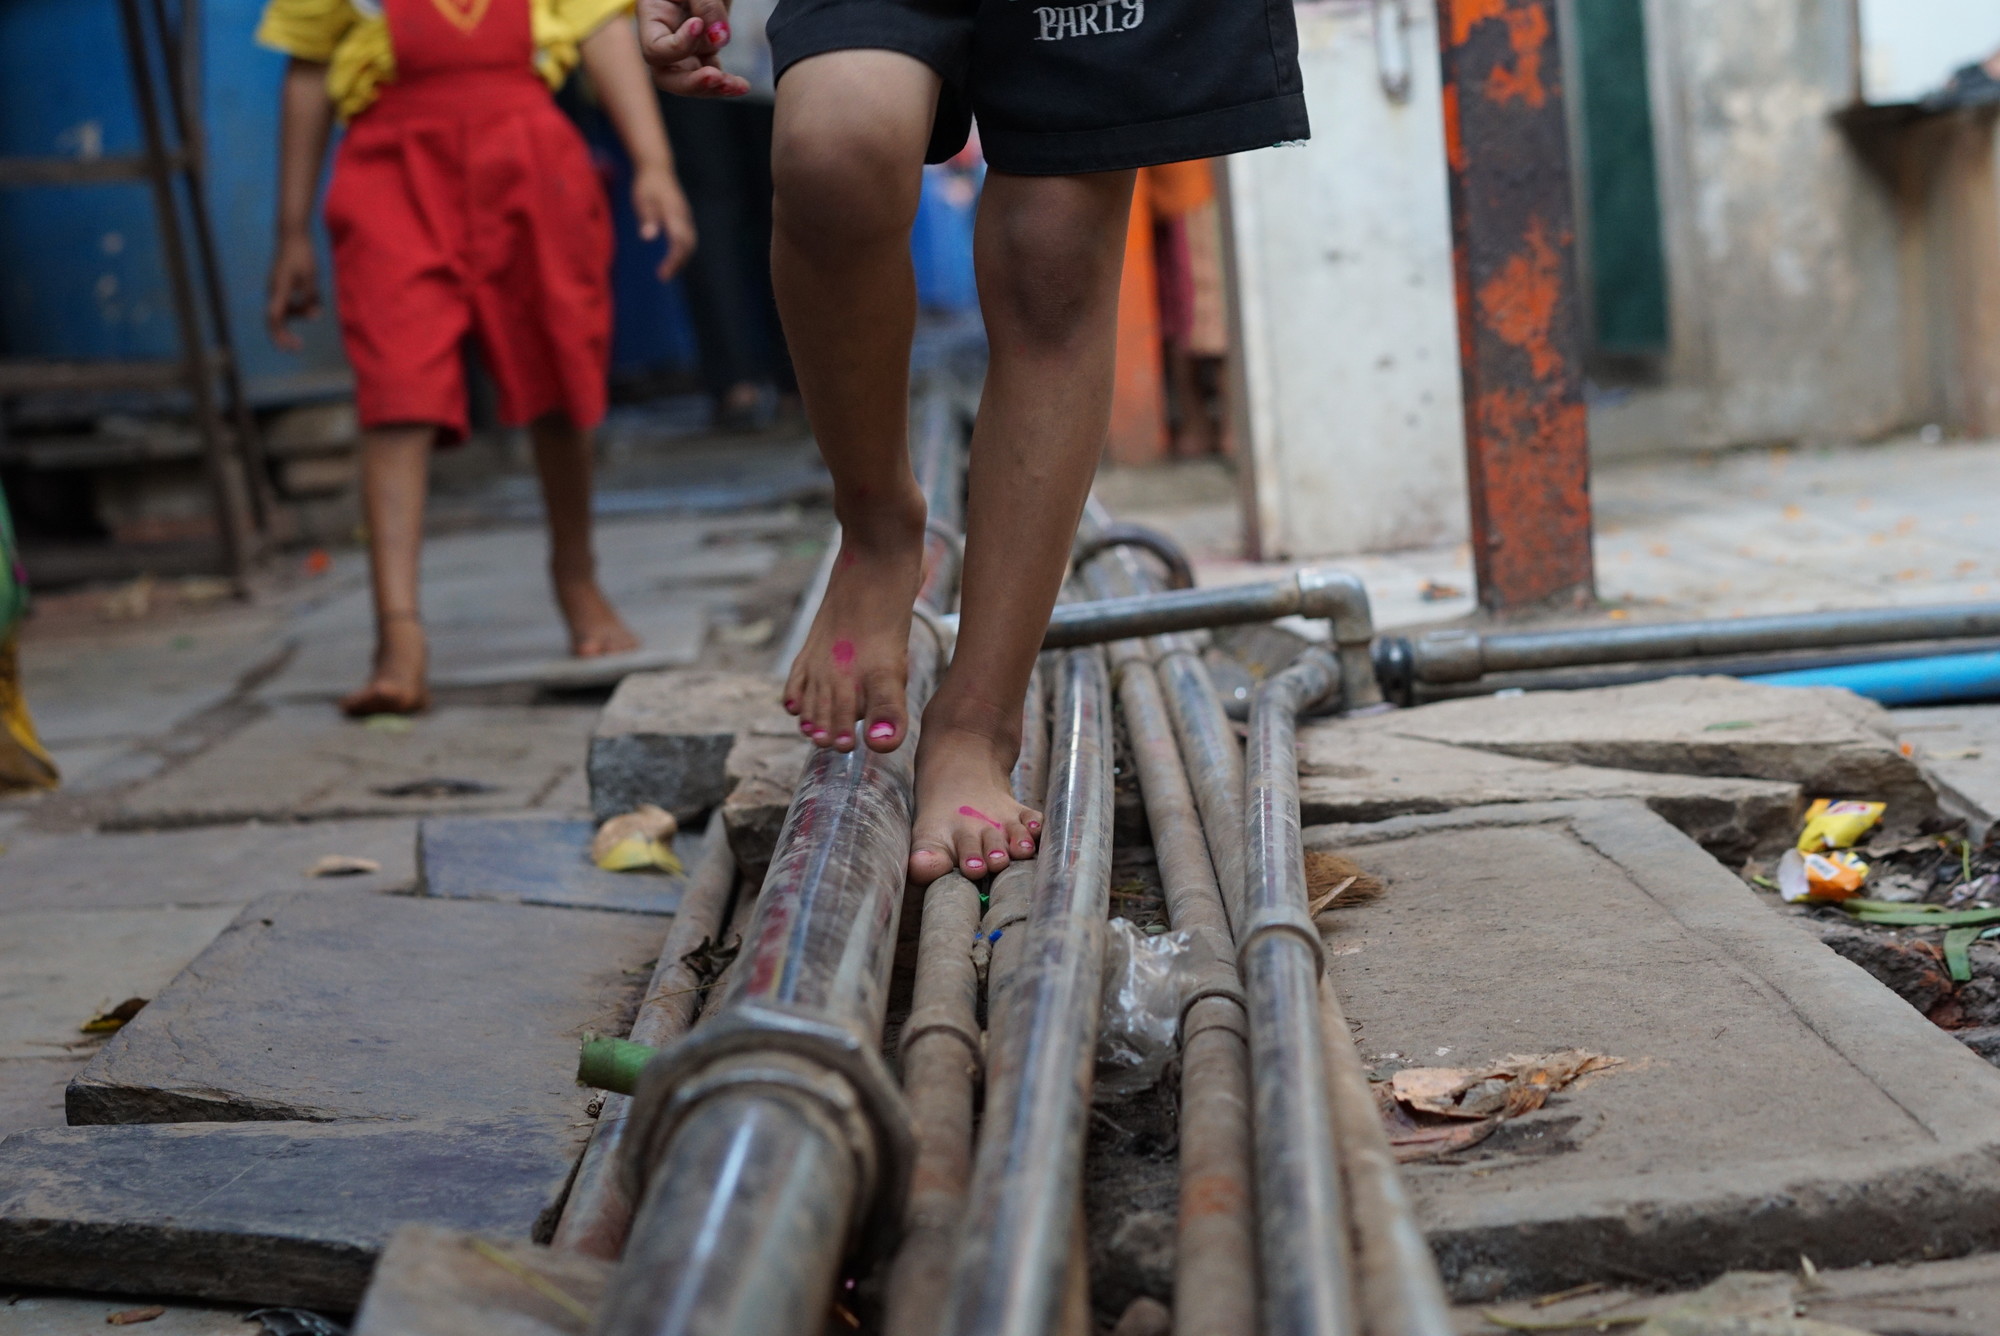 A child's thin legs, wearing black shorts, walk on top of a bundle of various-sized water pipes